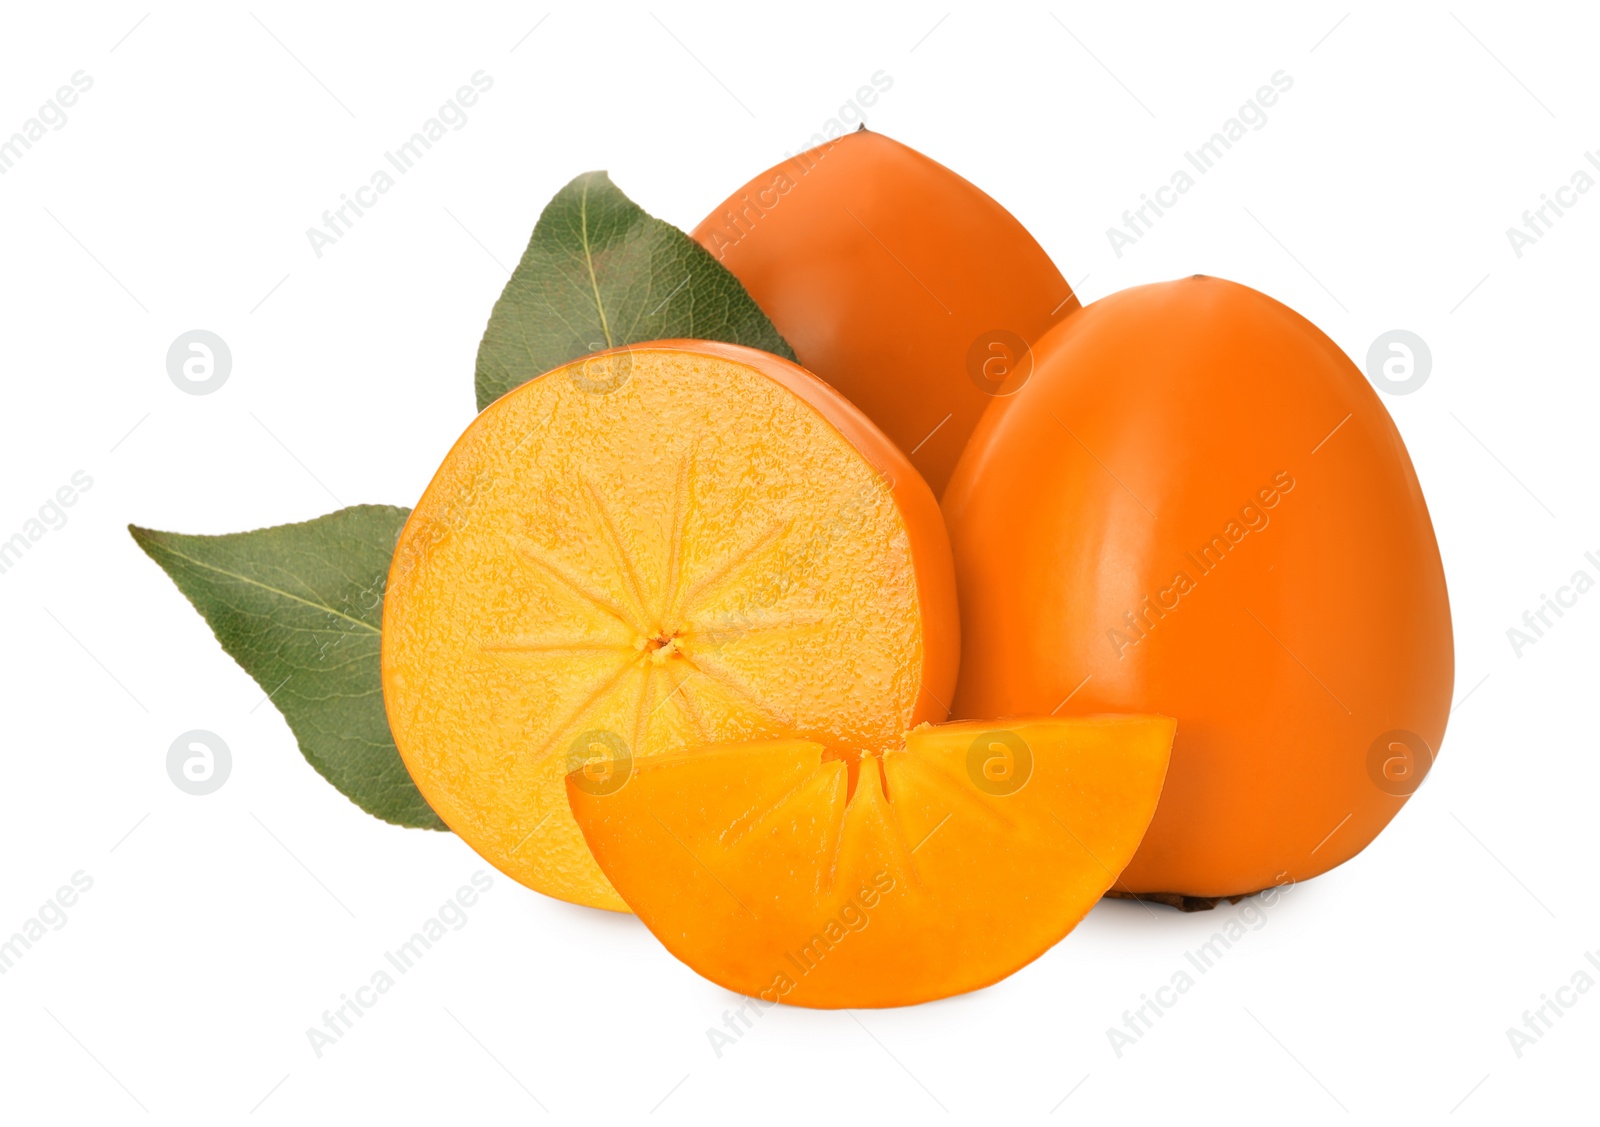 Photo of Whole and cut delicious ripe juicy persimmons on white background